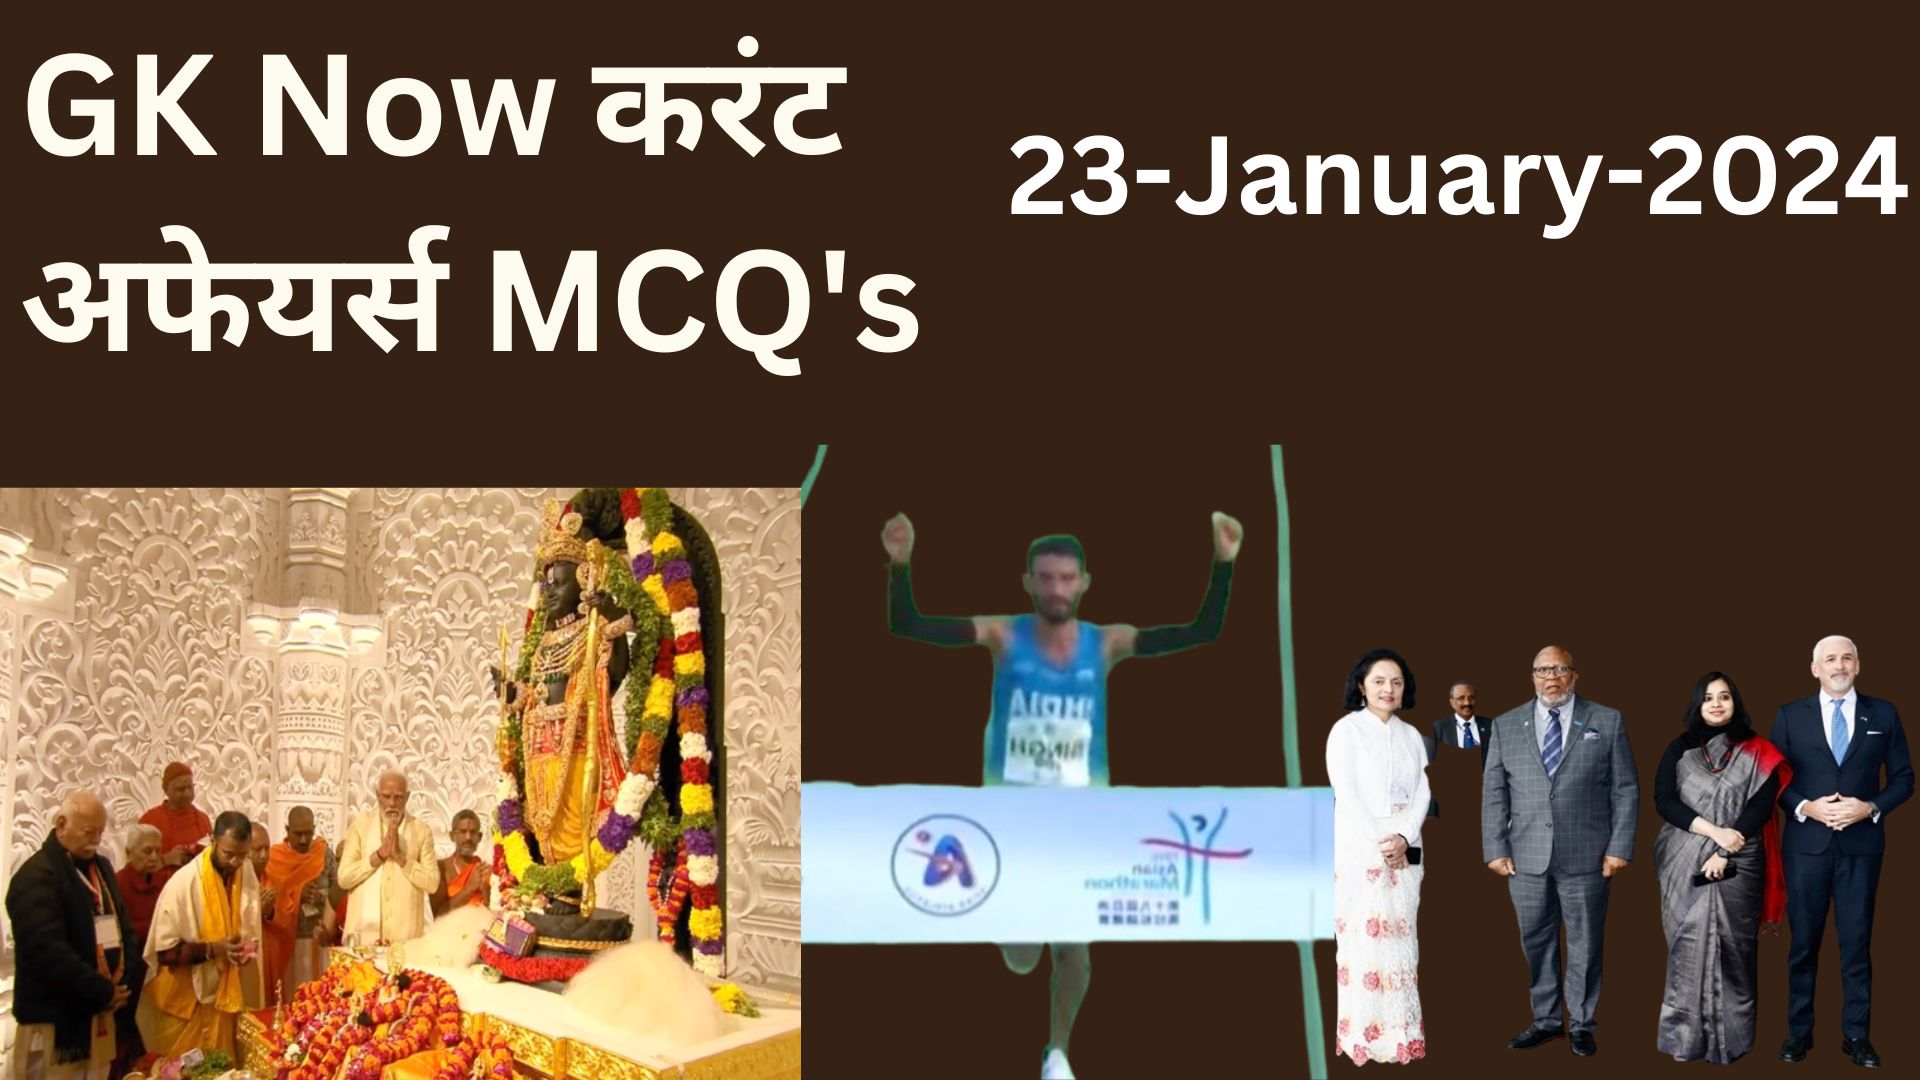 Daily Current Affairs MCQ 23 January 2024 GK Now